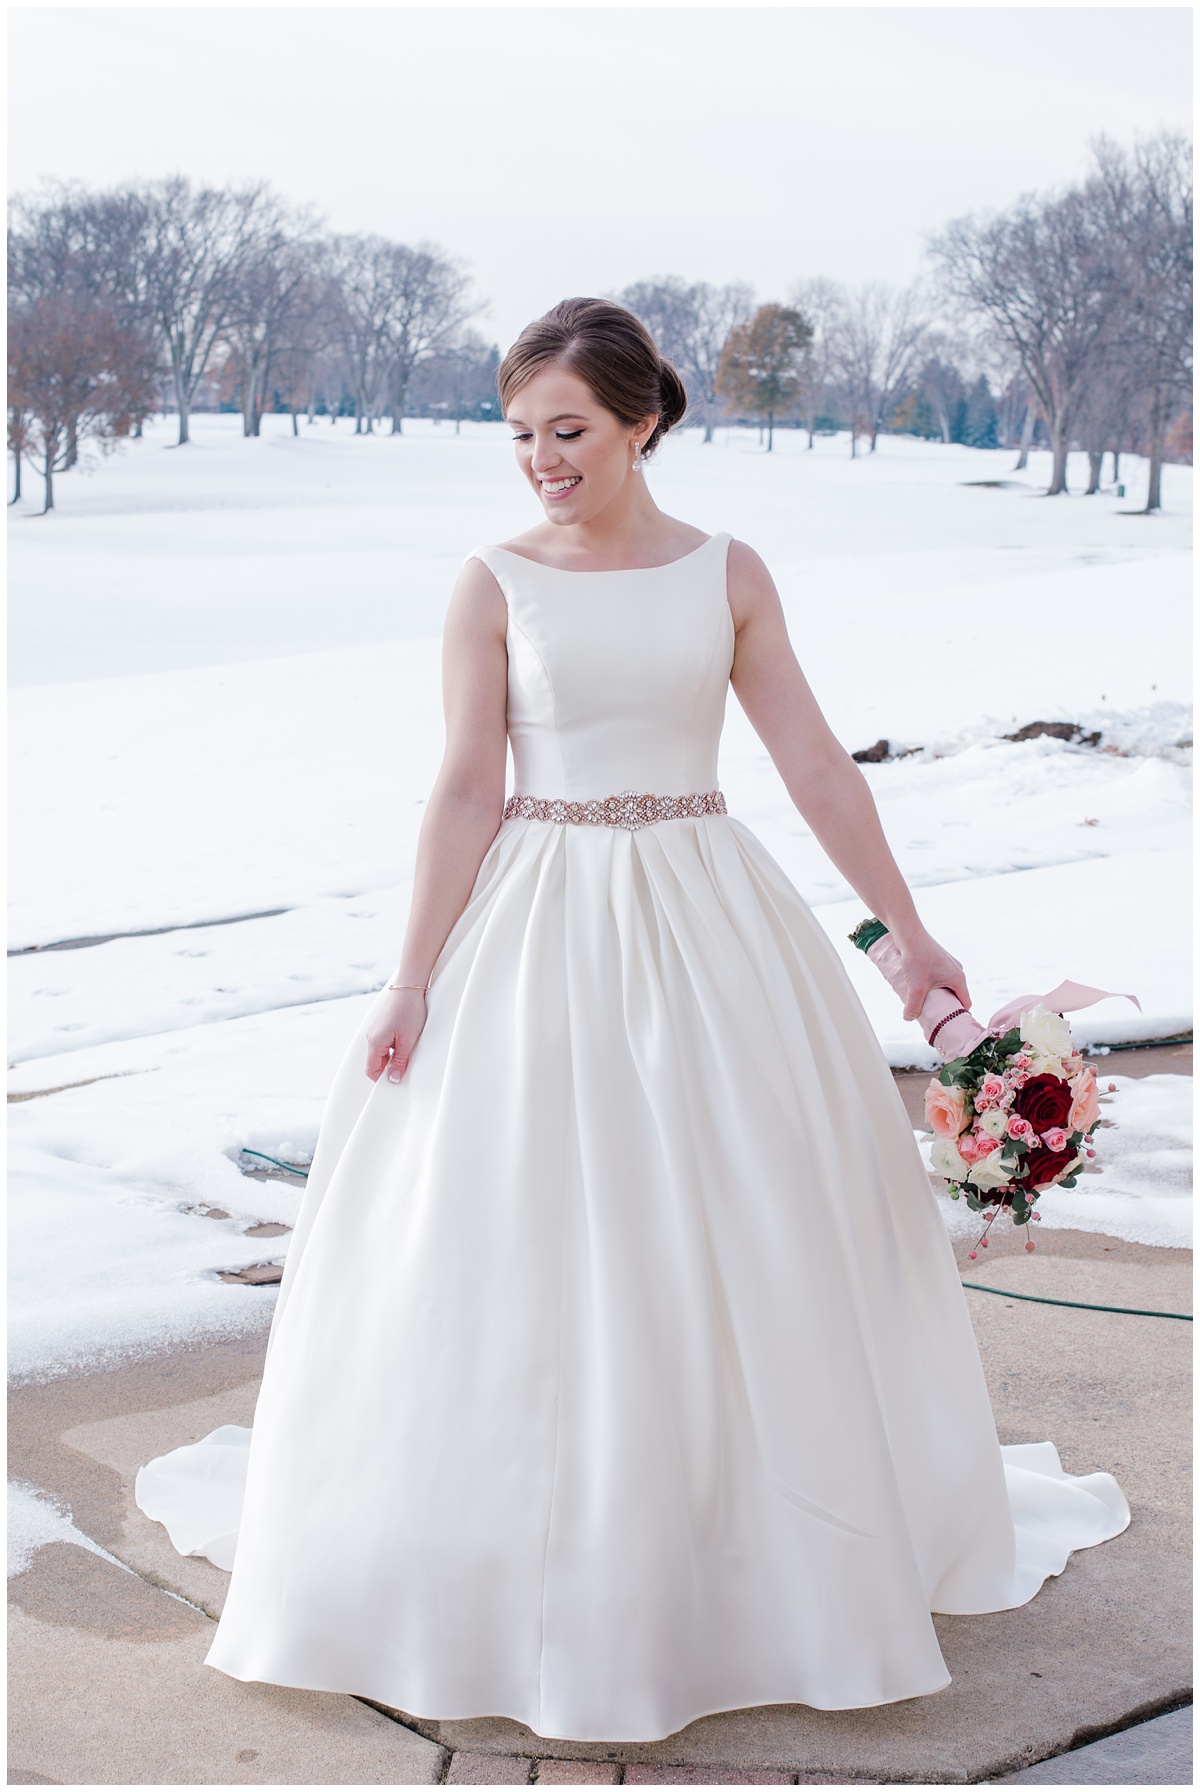 Bride wearing a simple, yet elegant princess dress with a pink belt made of crystals, holds her bouquet and looks down with a winter wonderland behind her.